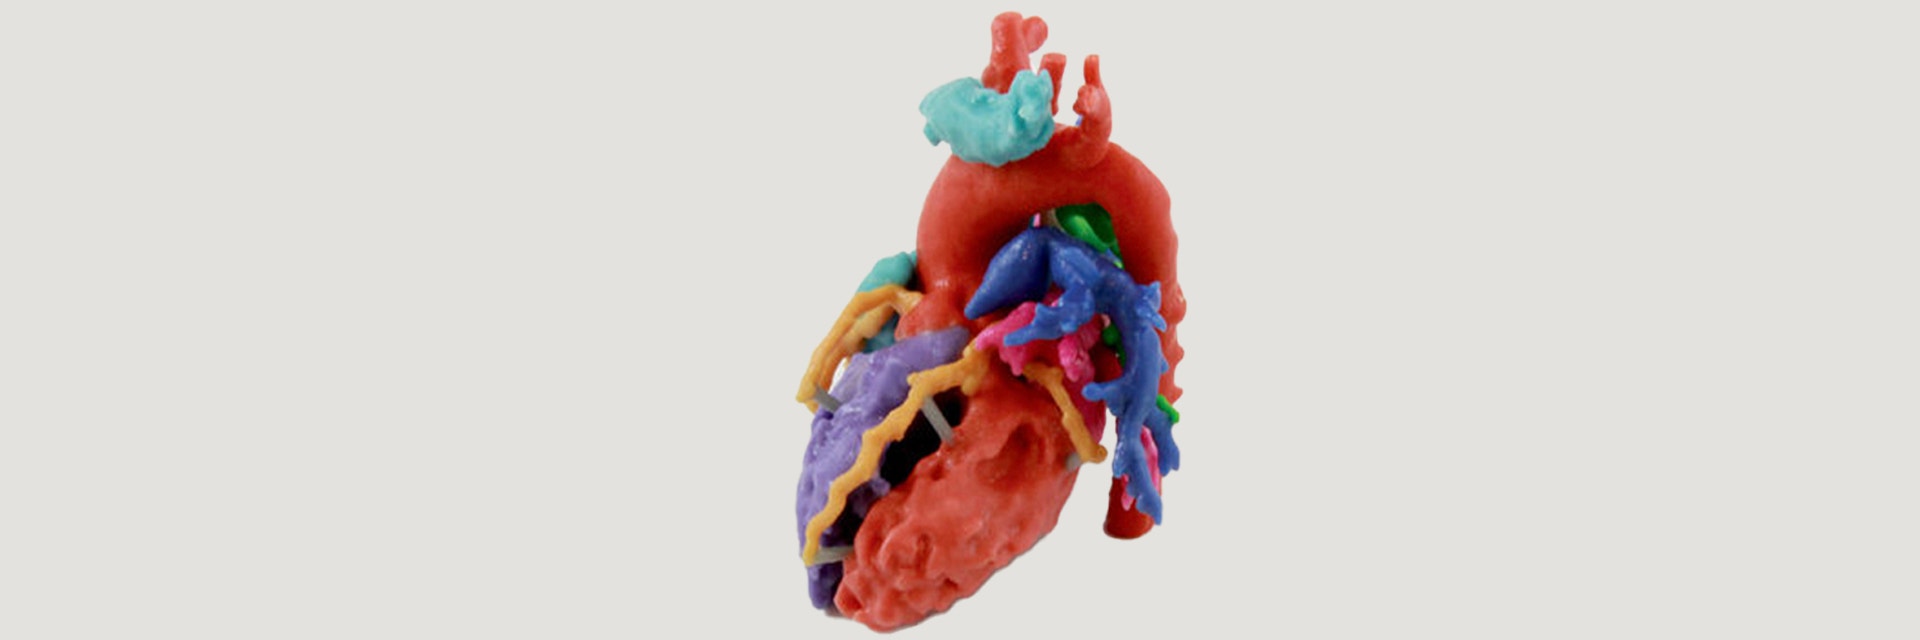 Colorful, 3D-printed heart model